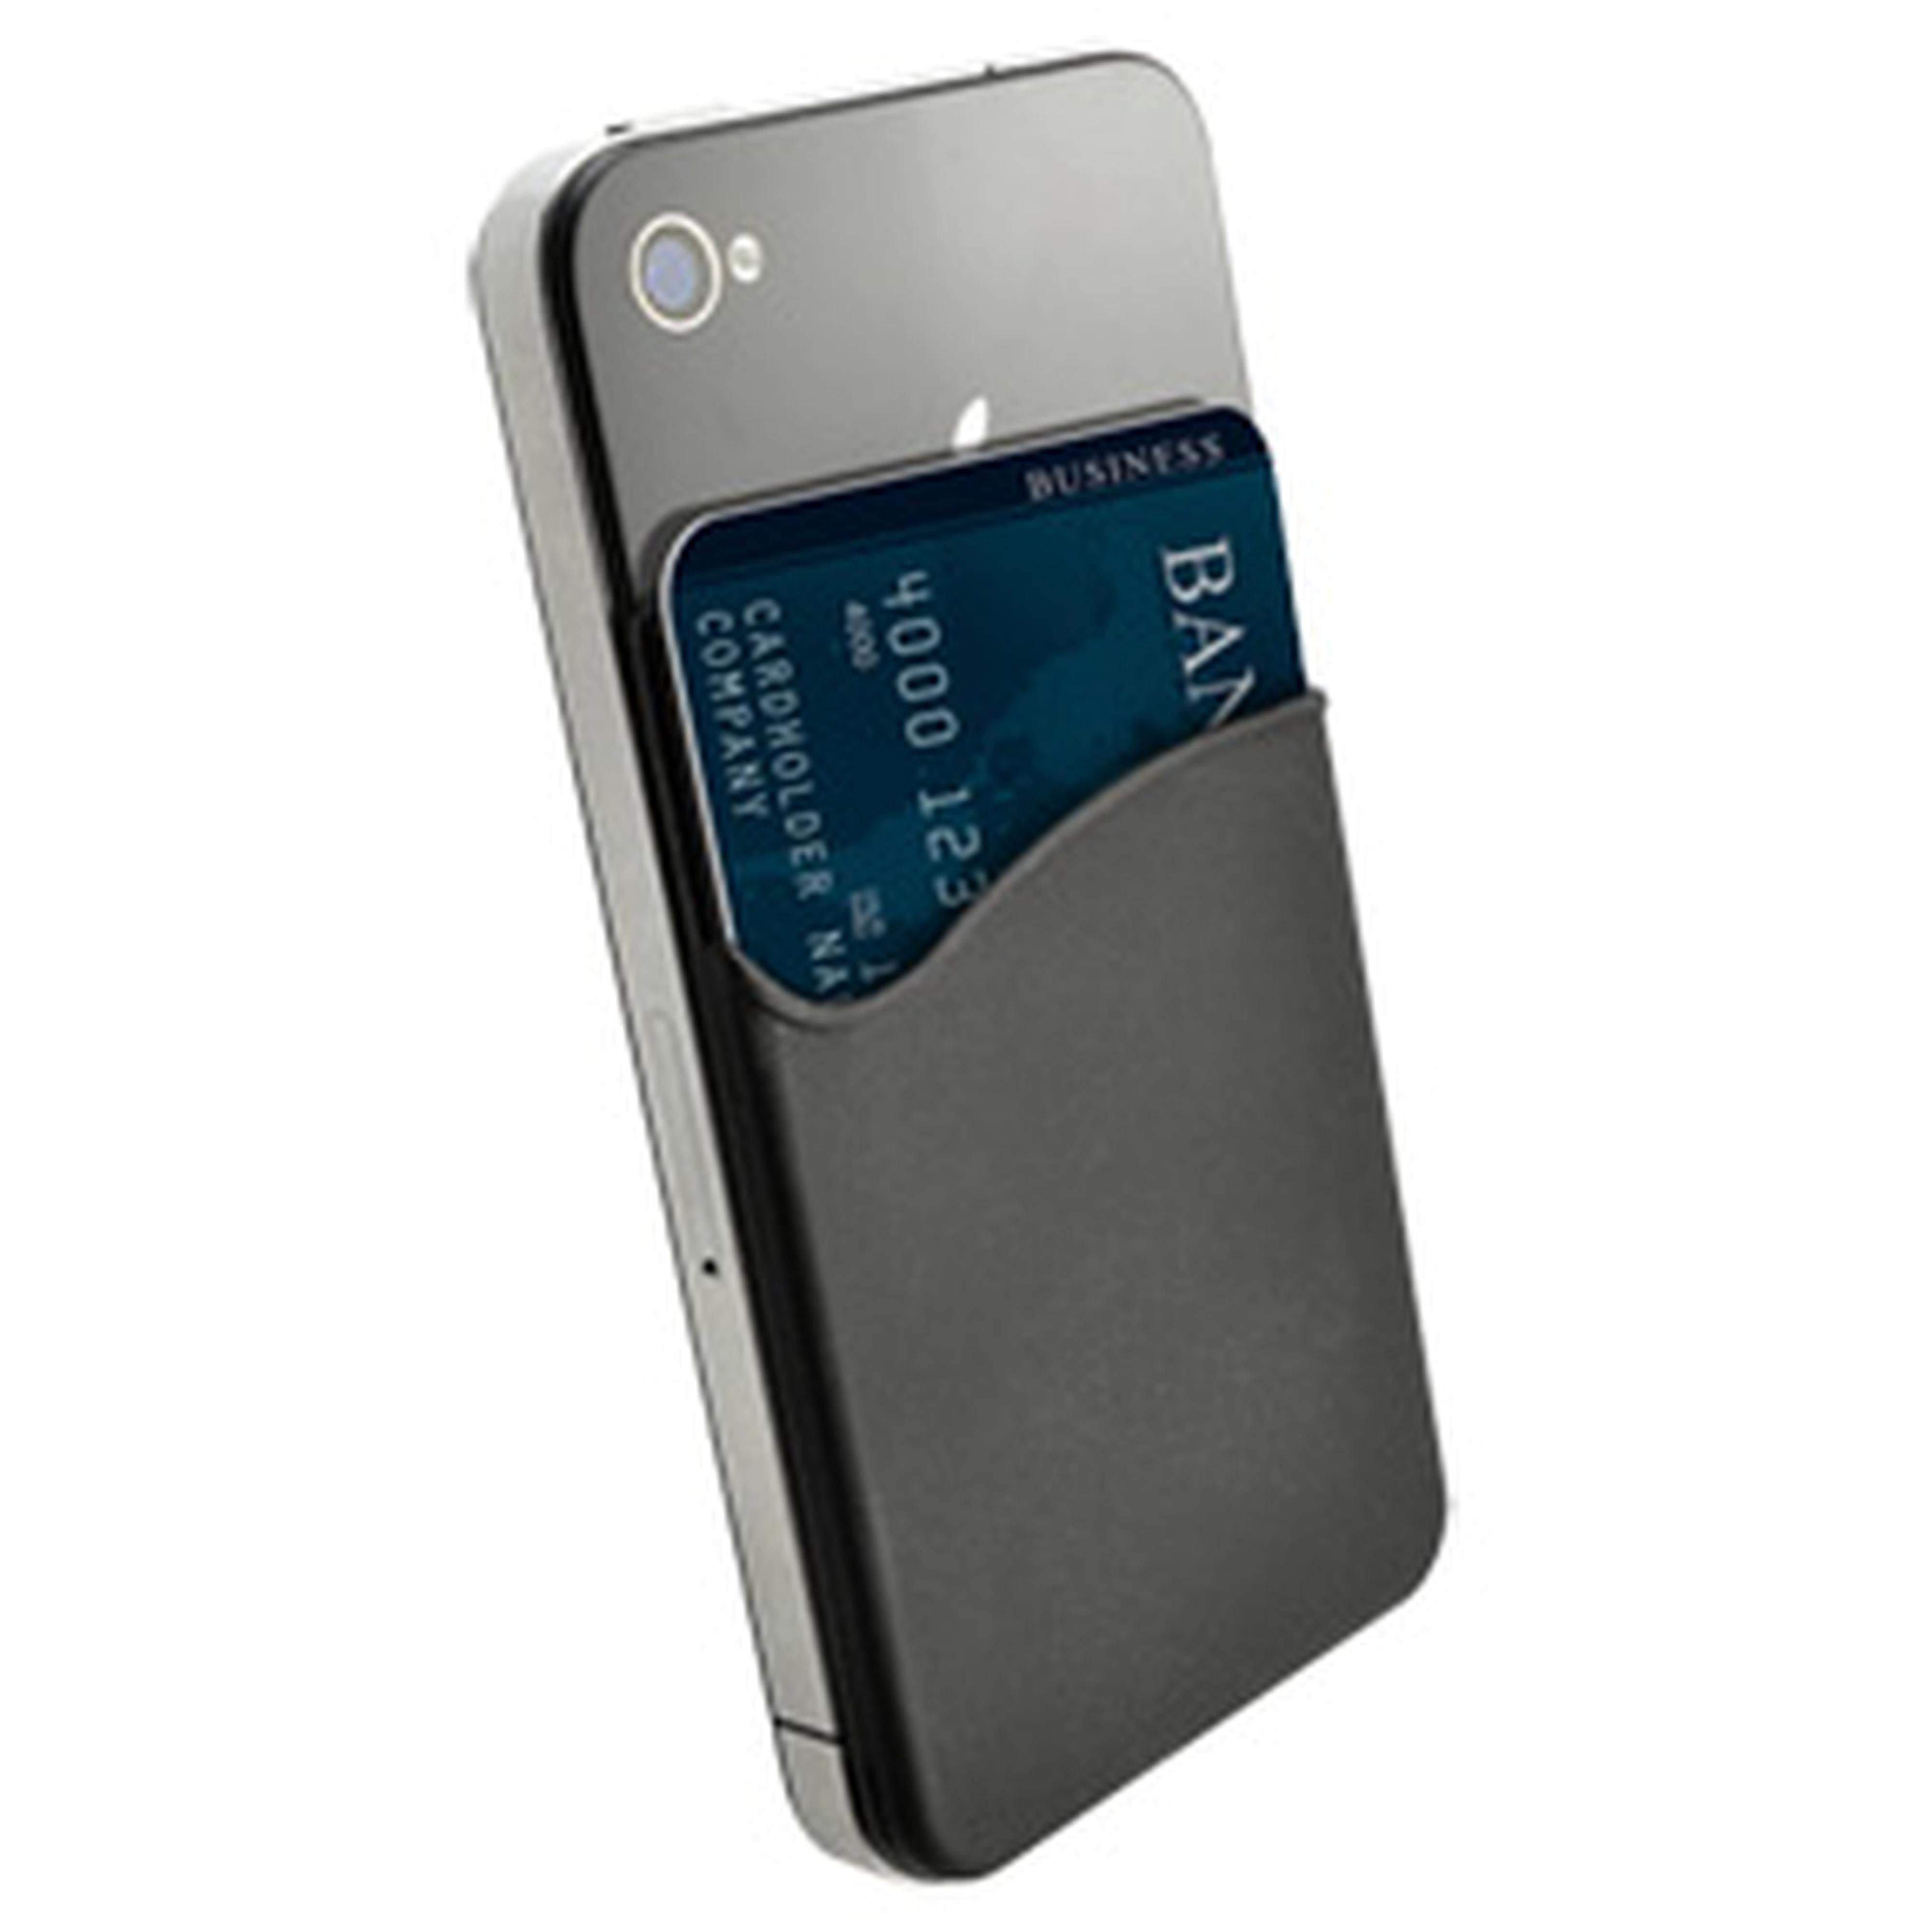  USA Merchant, Cell Phone Wallet with Stand by Cellessentials:  (for Credit Card & Id) iPhone, Android & Most Smartphones